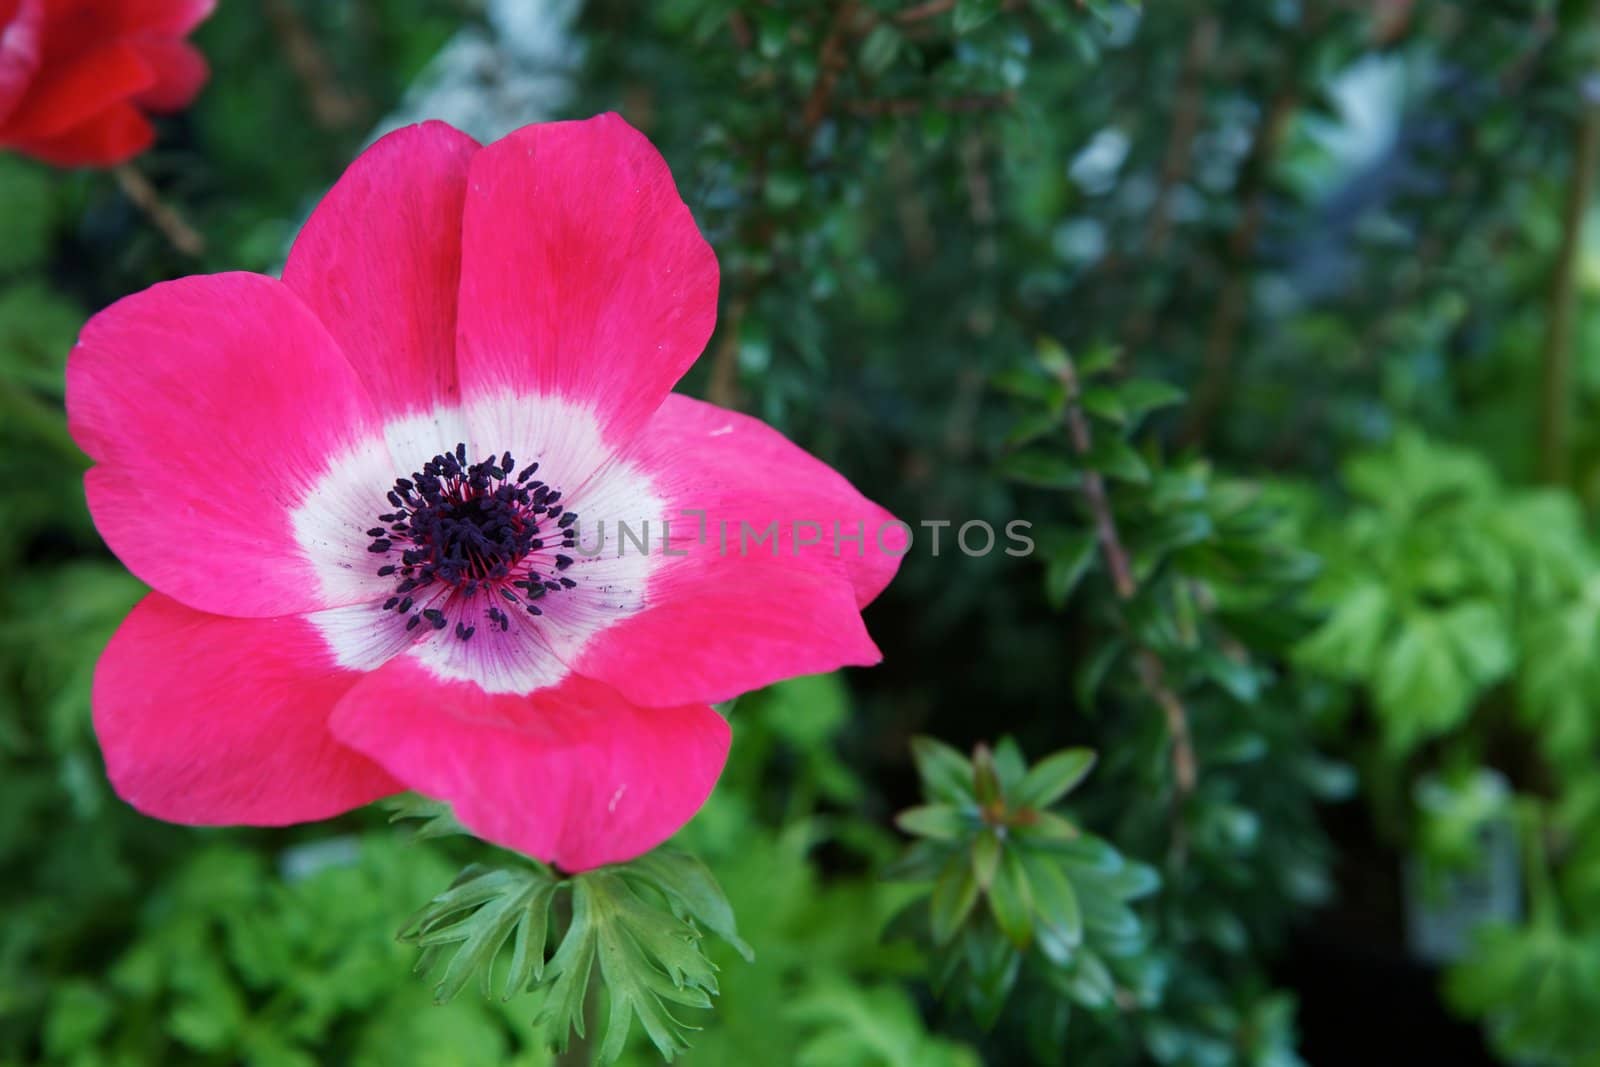 Wide open bloom of red pink poppy with soft green plant background